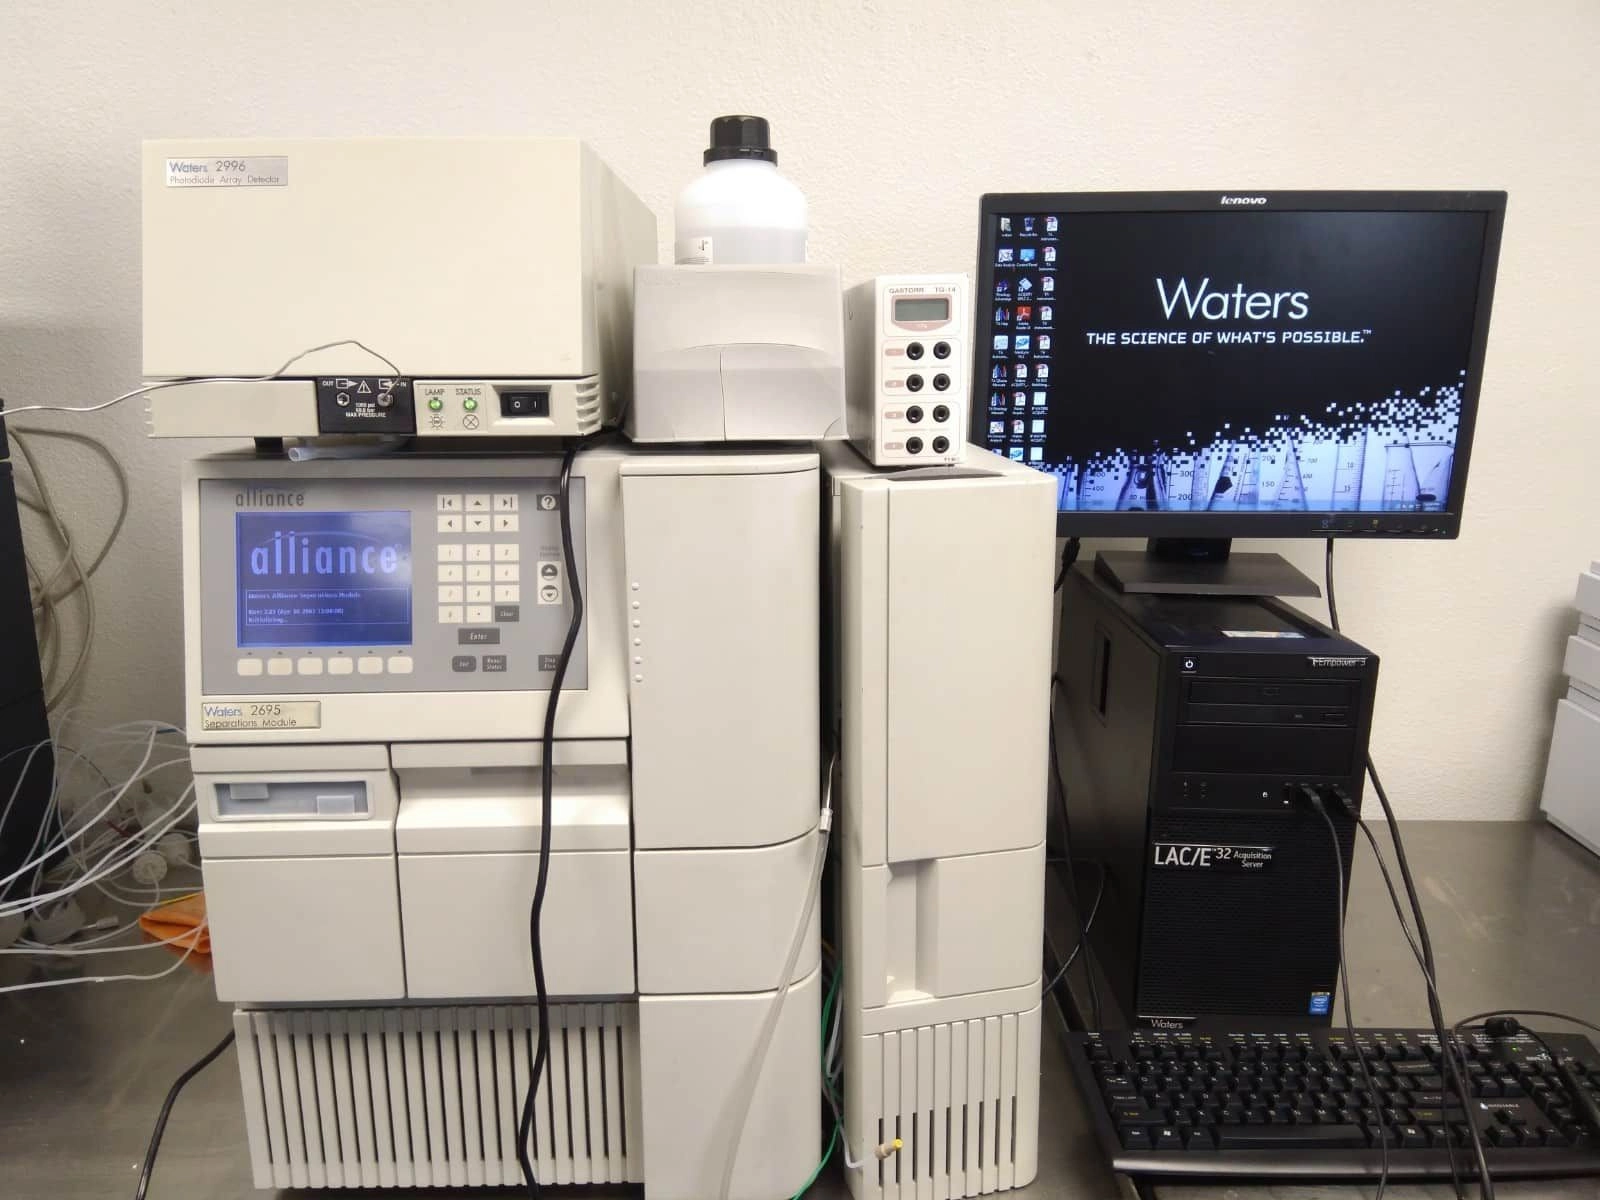 Waters Alliance 2695 HPLC System with Waters 2996 PDA Detector, Column Heater and Software